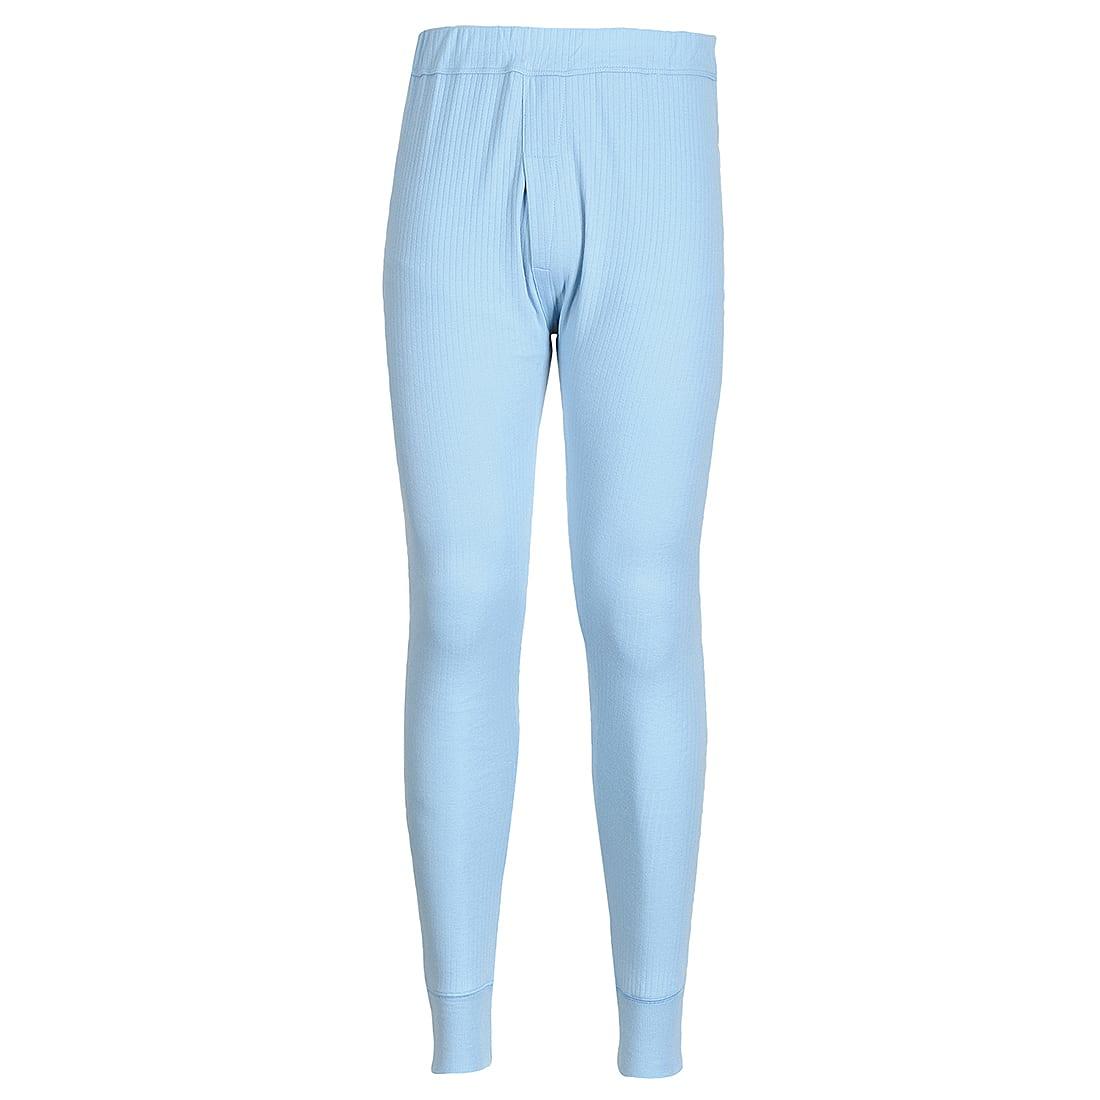 Portwest Thermal Trousers in Sky (Product Code: B121)